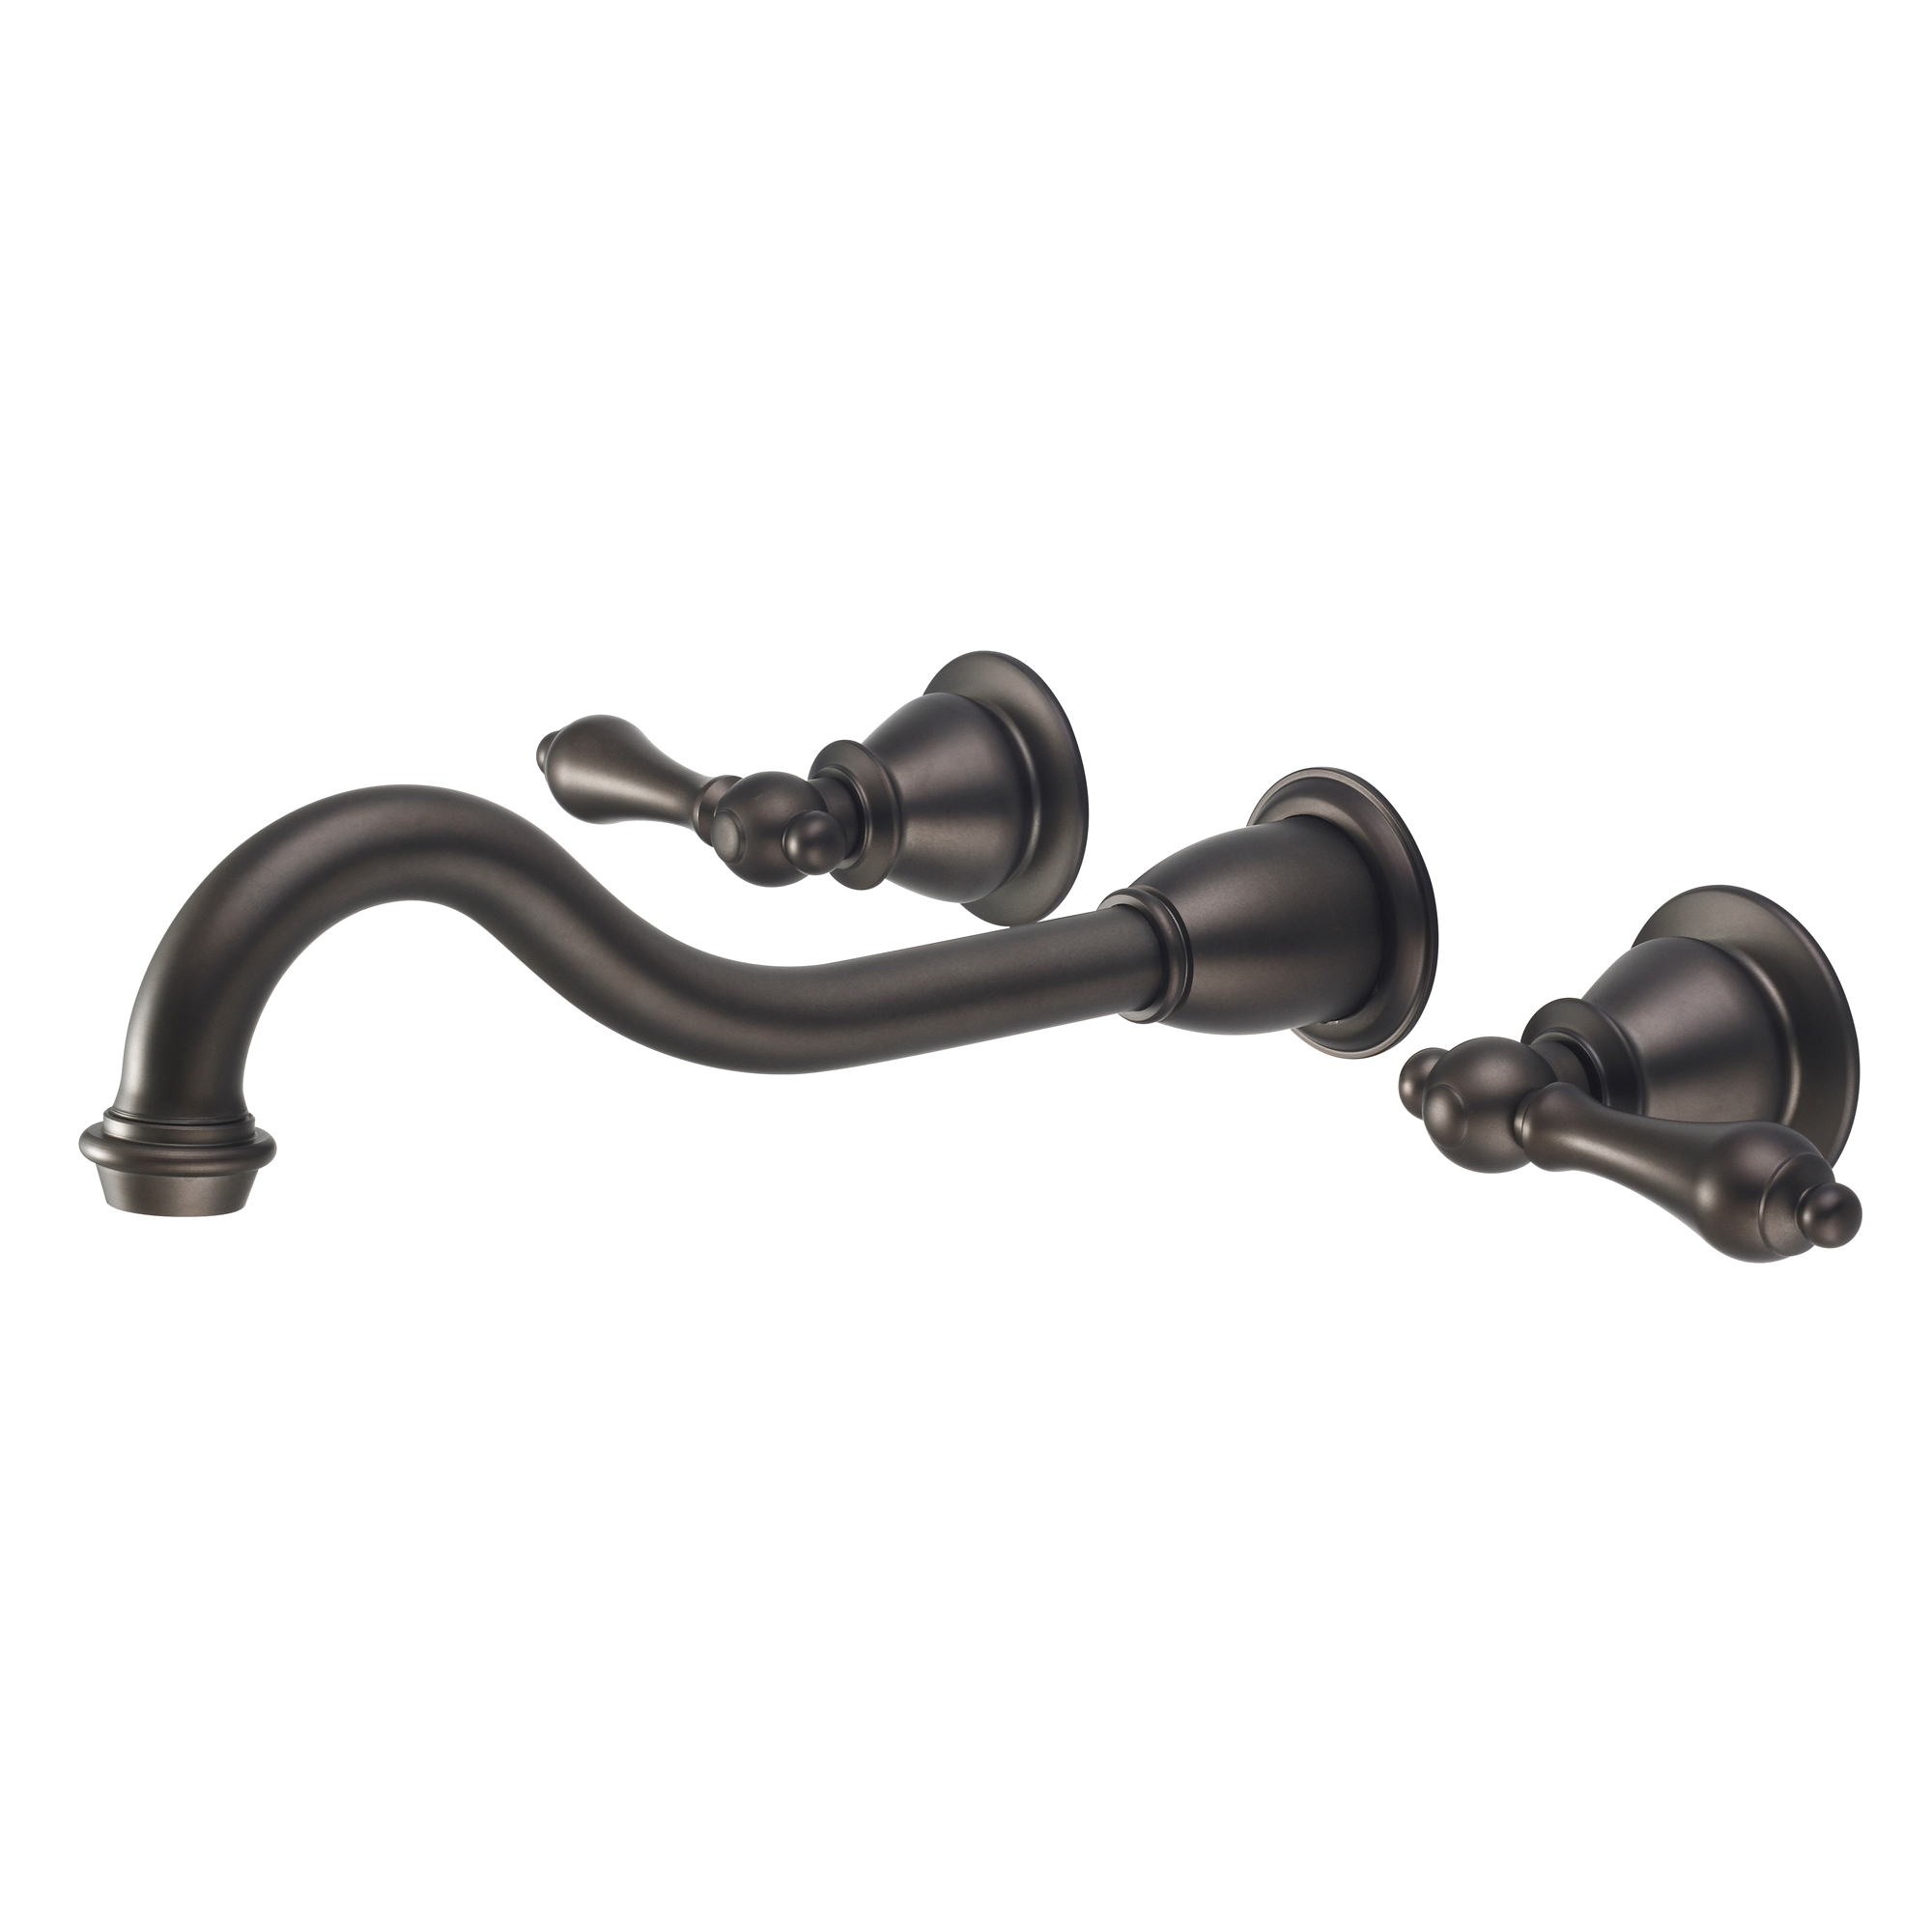 Elegant Spout Wall Mount Vessel/Lavatory Faucets in Oil-rubbed Bronze Finish Finish With Metal Lever Handles Without Labels